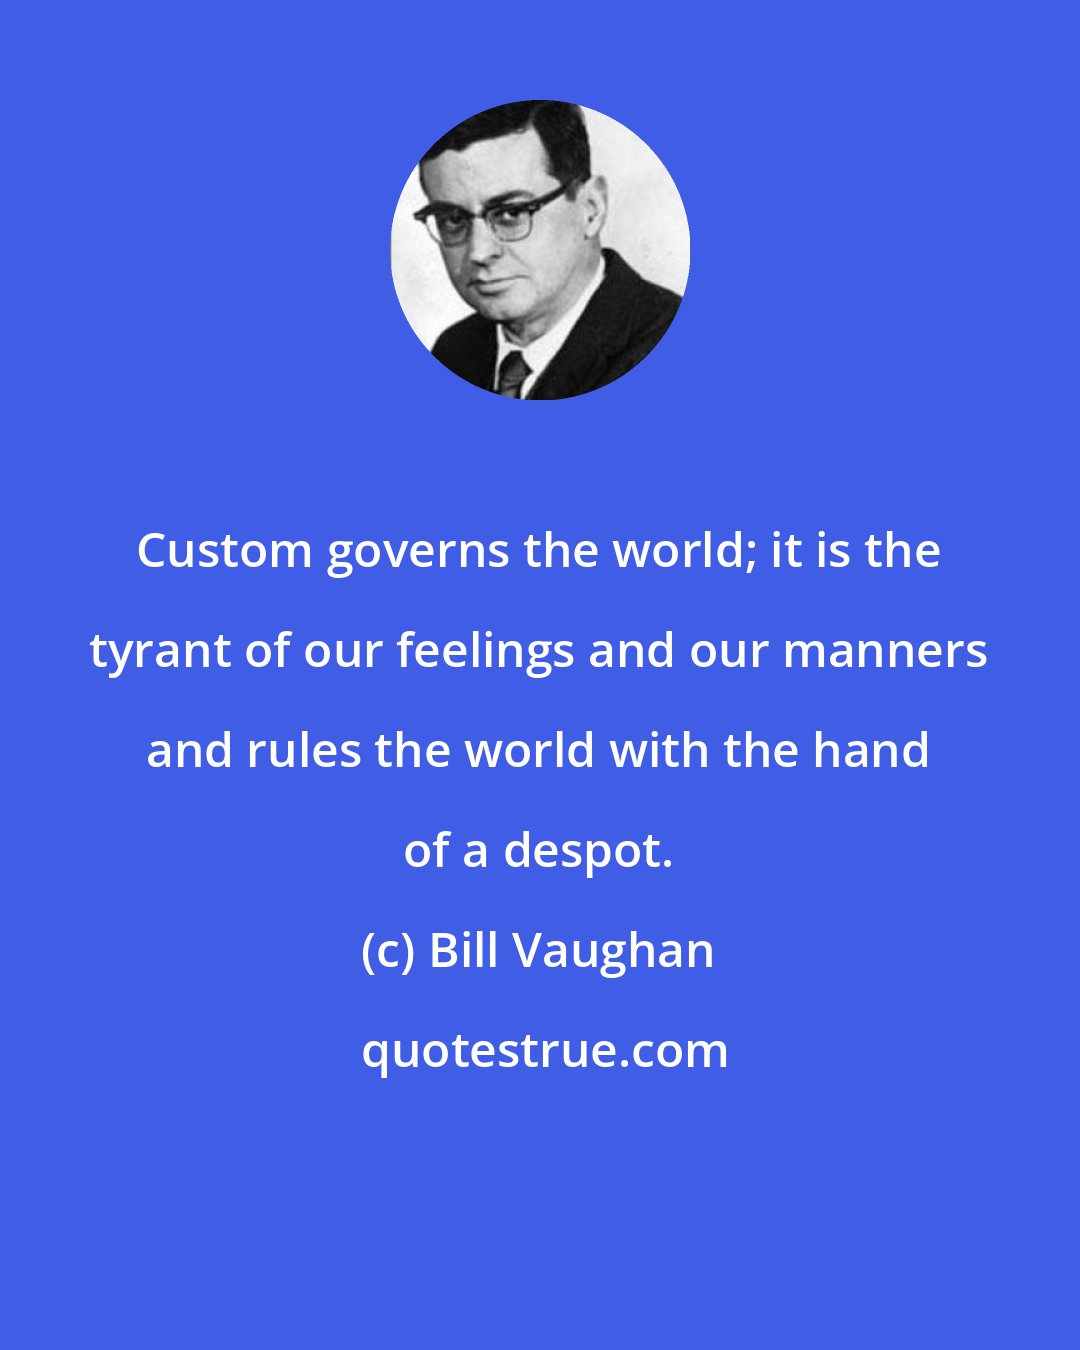 Bill Vaughan: Custom governs the world; it is the tyrant of our feelings and our manners and rules the world with the hand of a despot.